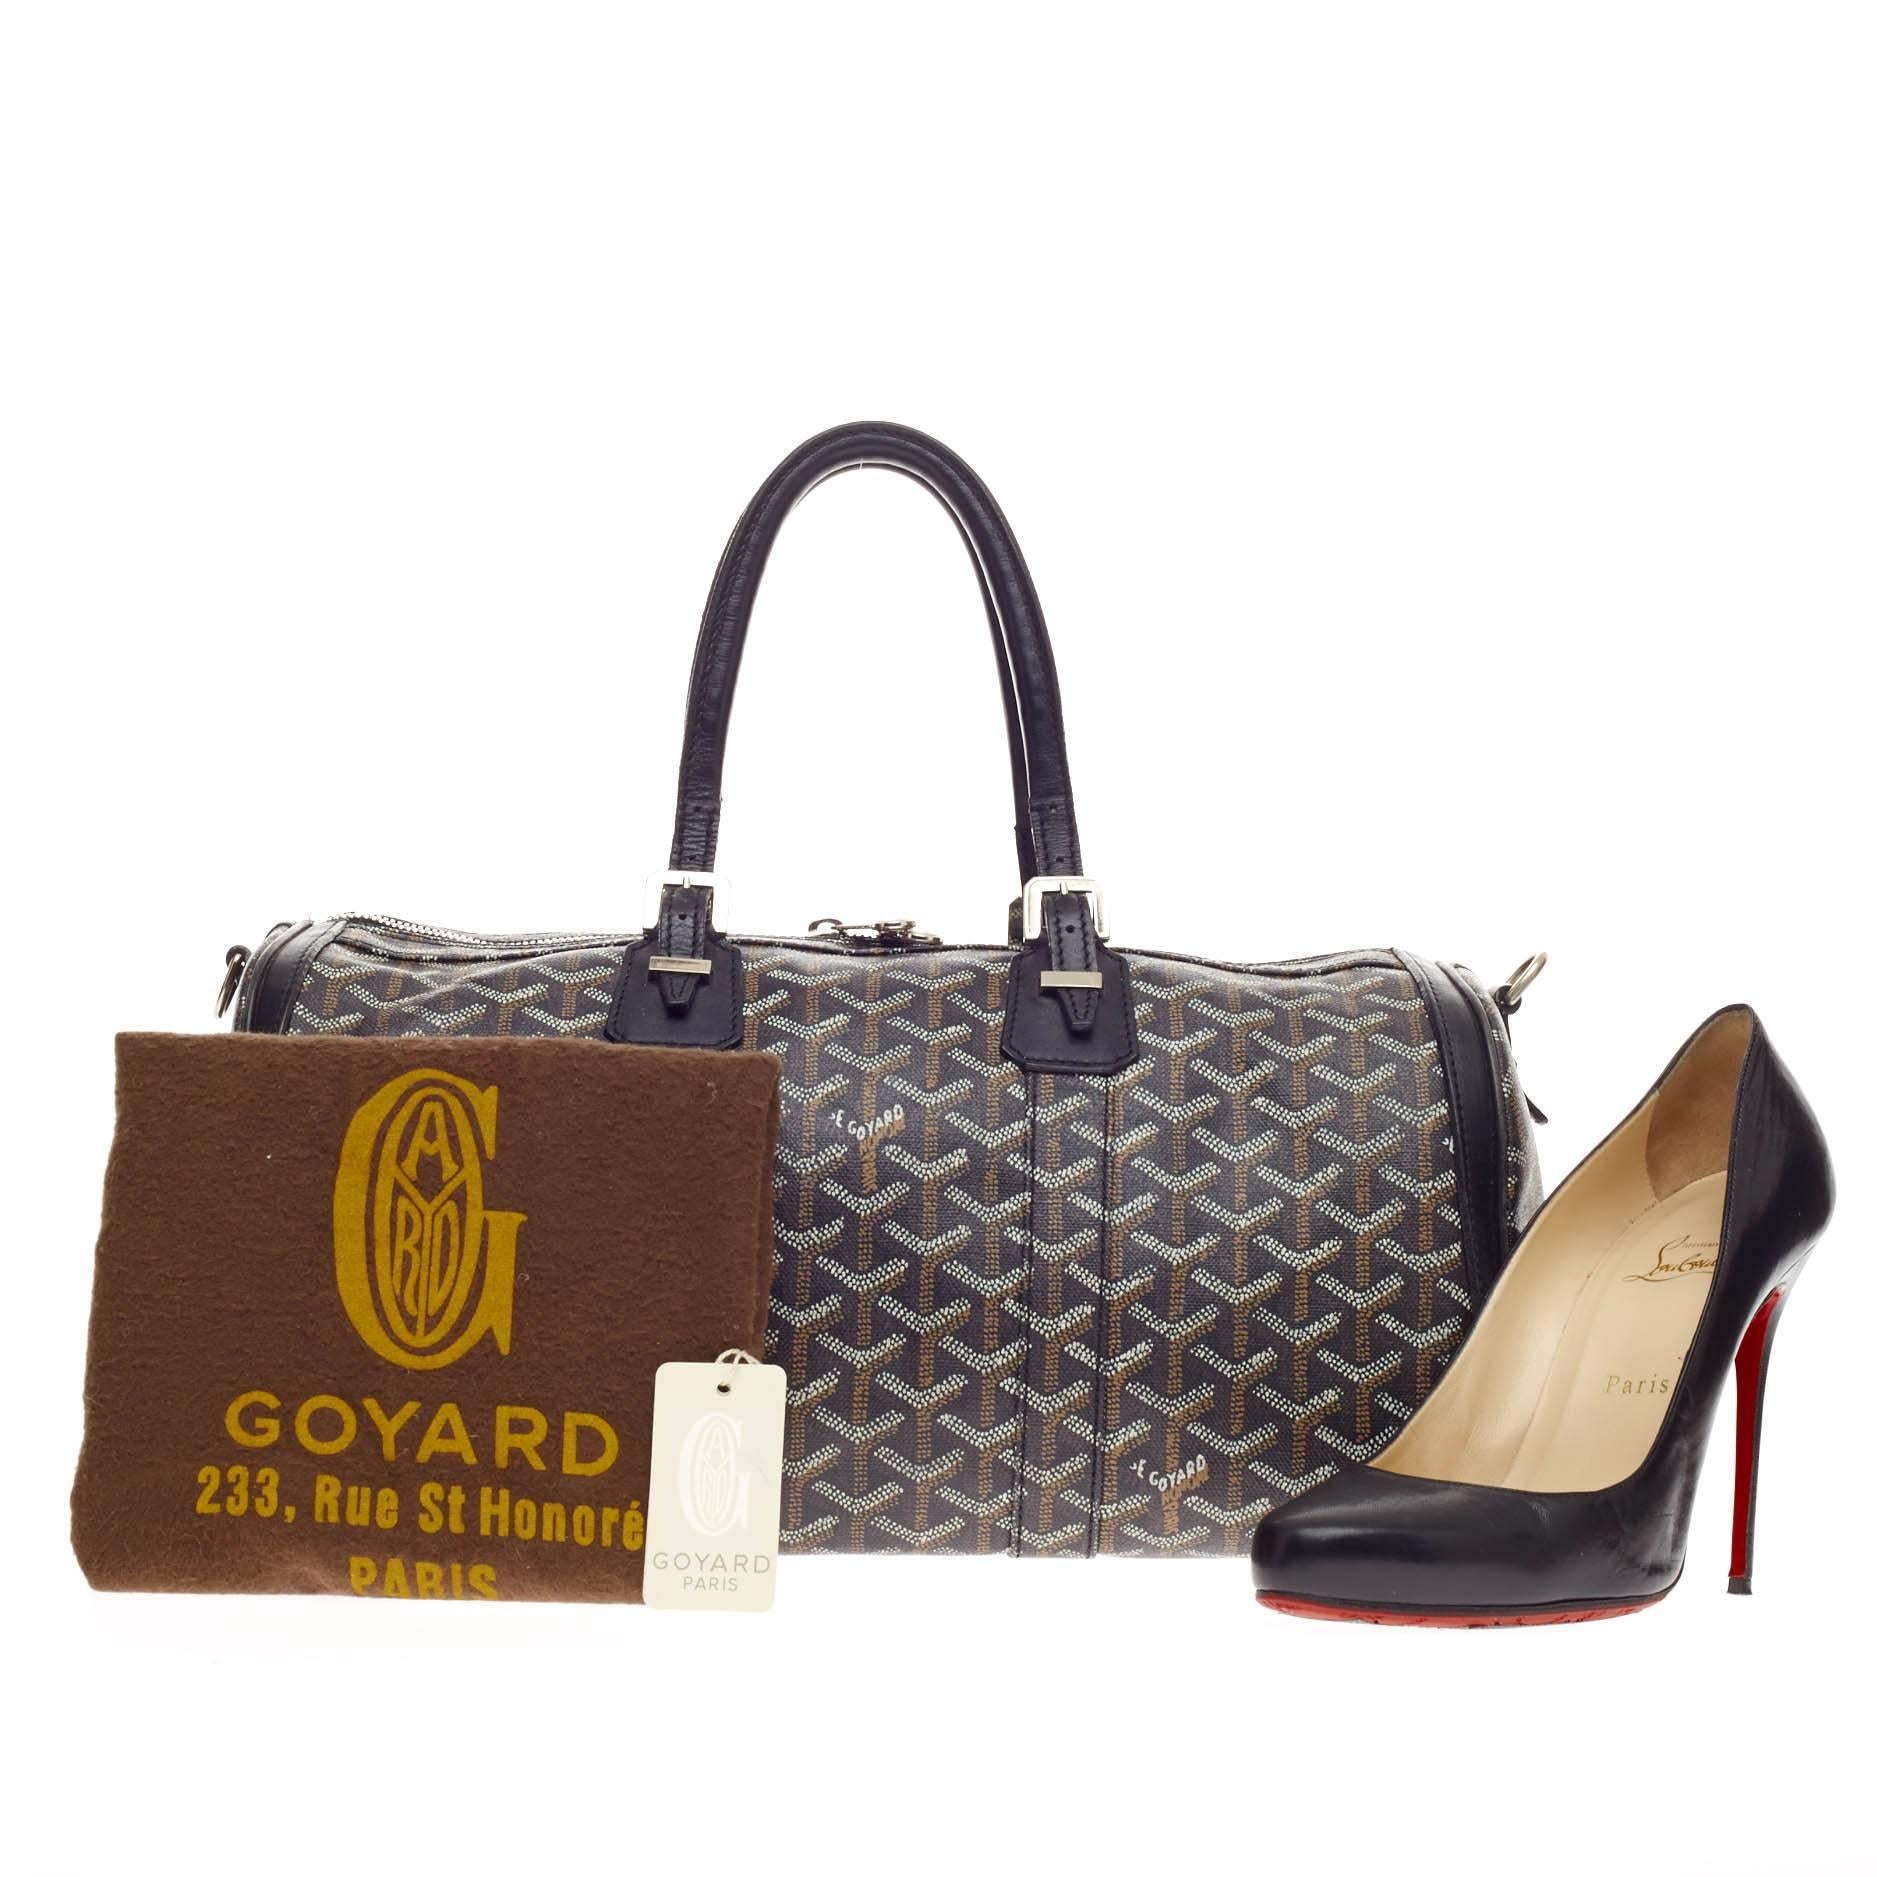 This authentic Goyard Croisiere Canvas 40 is an exclusive chic tote perfect for every fashionista. Crafted from Goyard's iconic black, white and brown chevron print in coated canvas, this luxe duffle features dual-rolled leather top handles, buckle